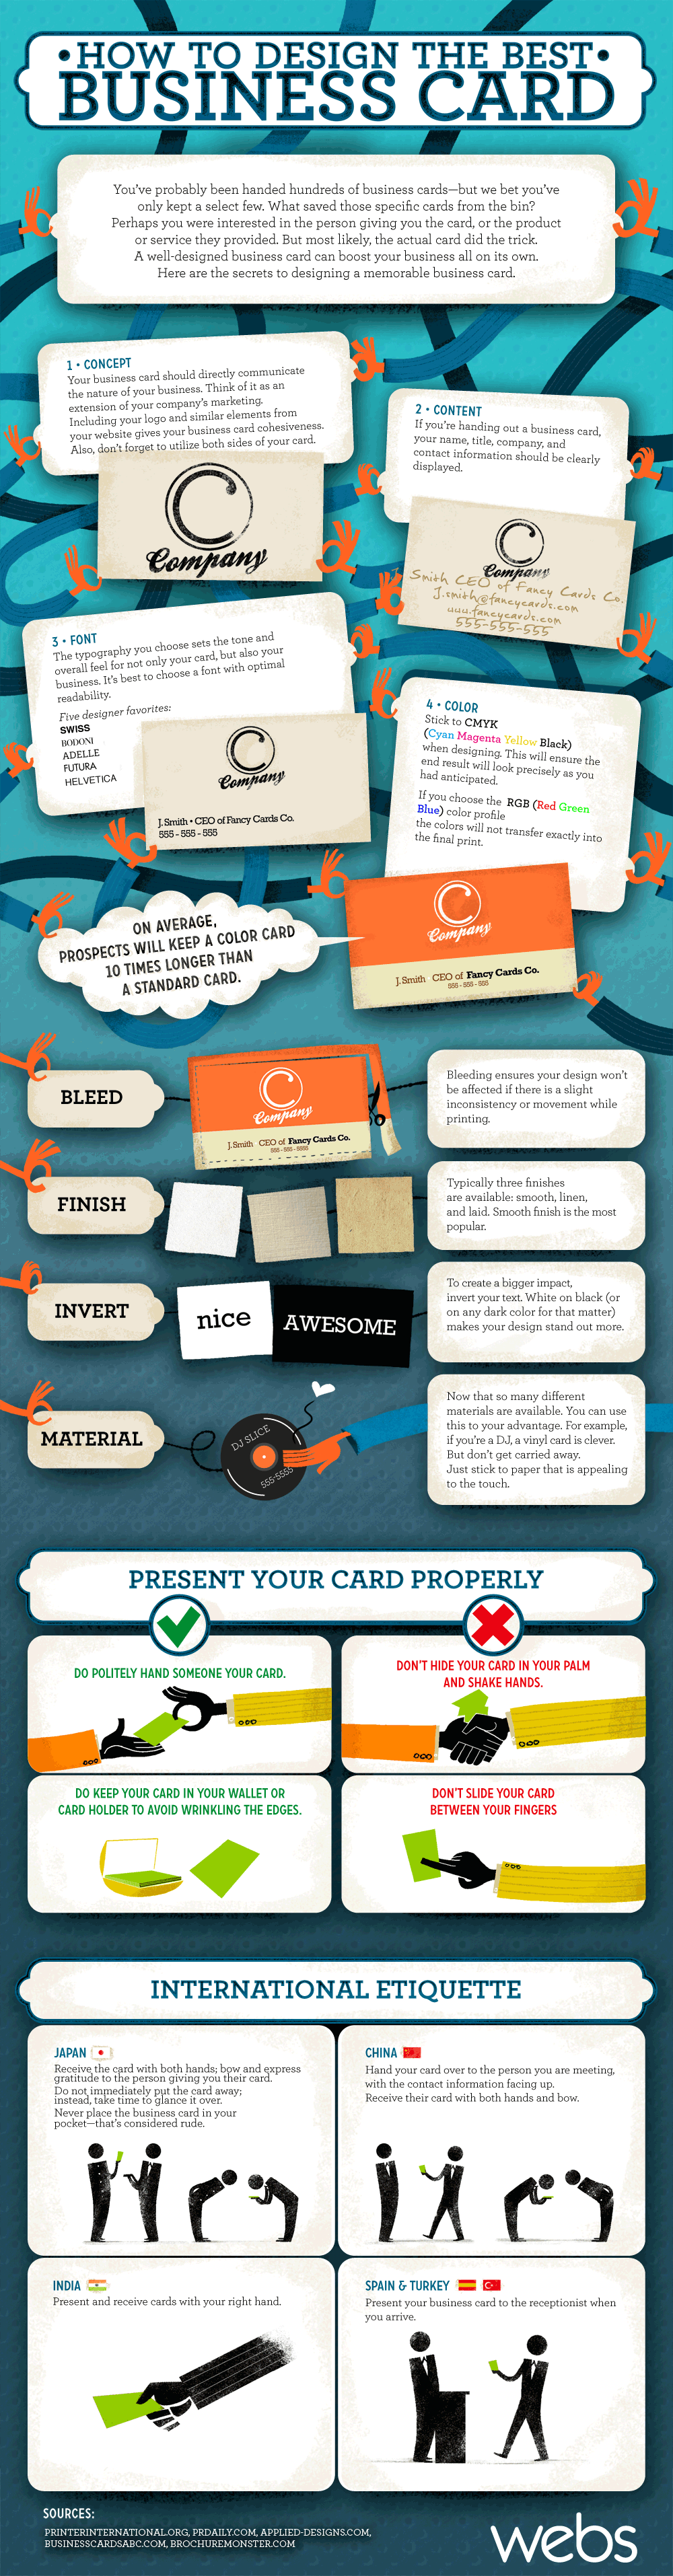 The Best Design & Practices For Business Cards [Infographic]